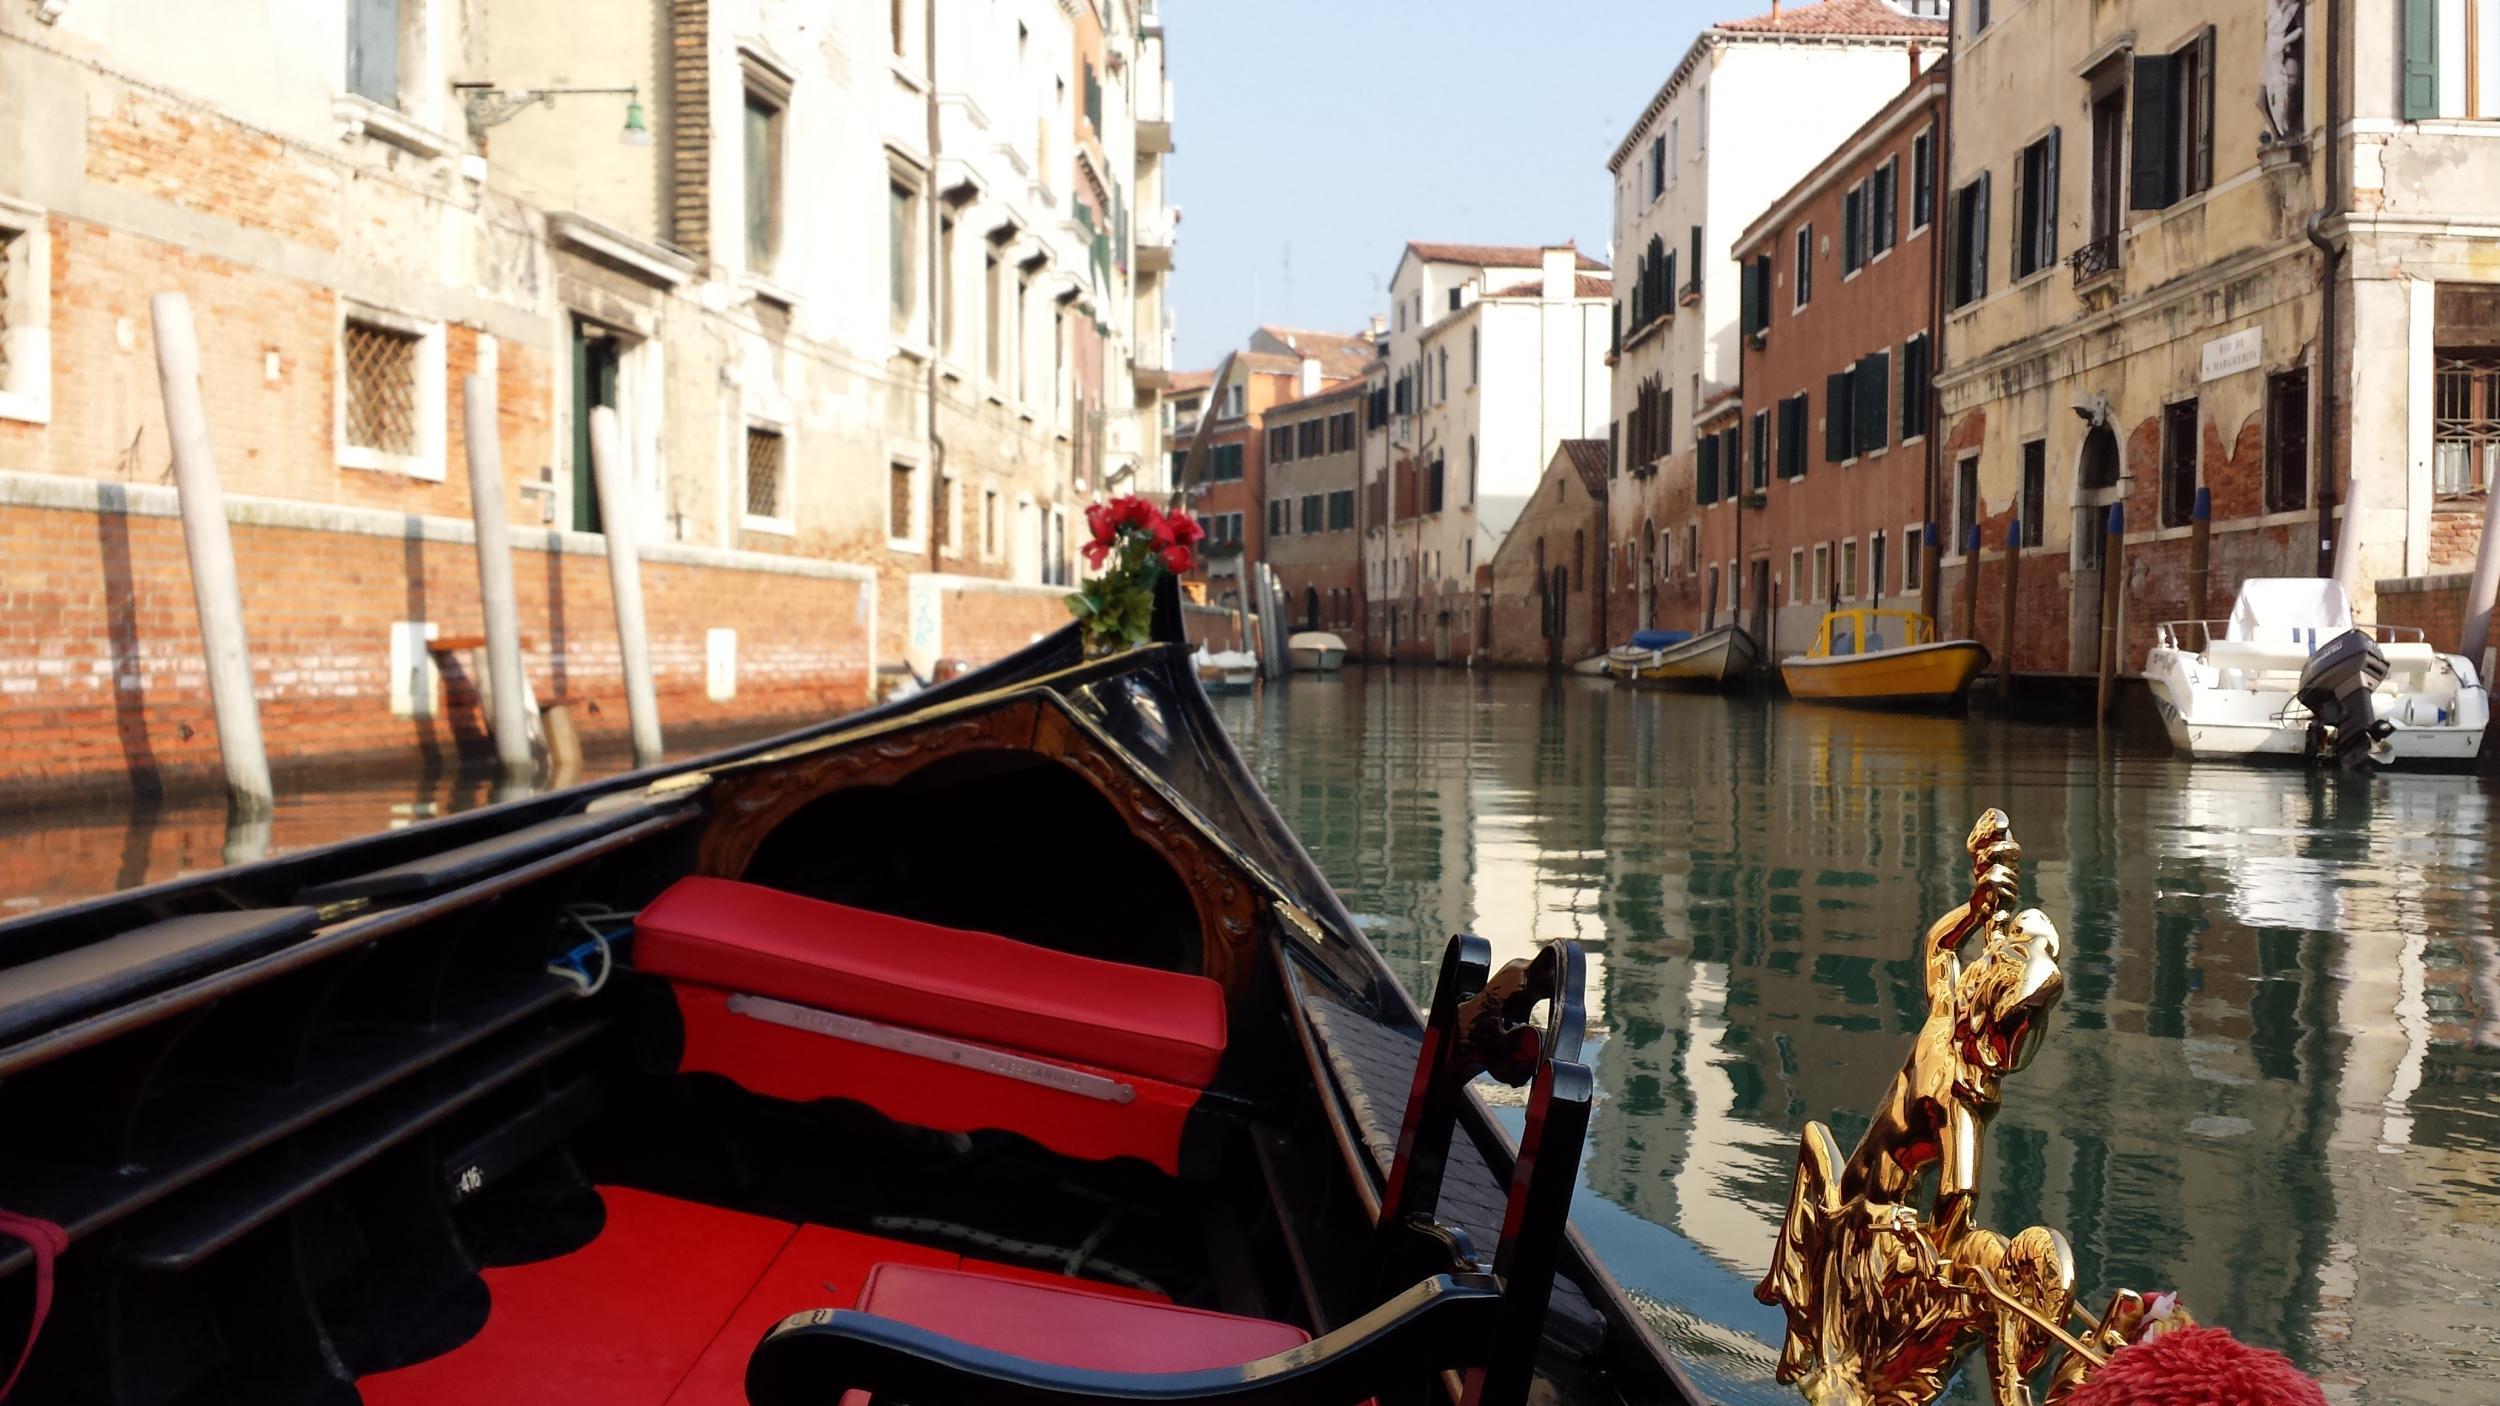 Riding a gondola is for a good cause, thanks to the launch of Gondolas4all